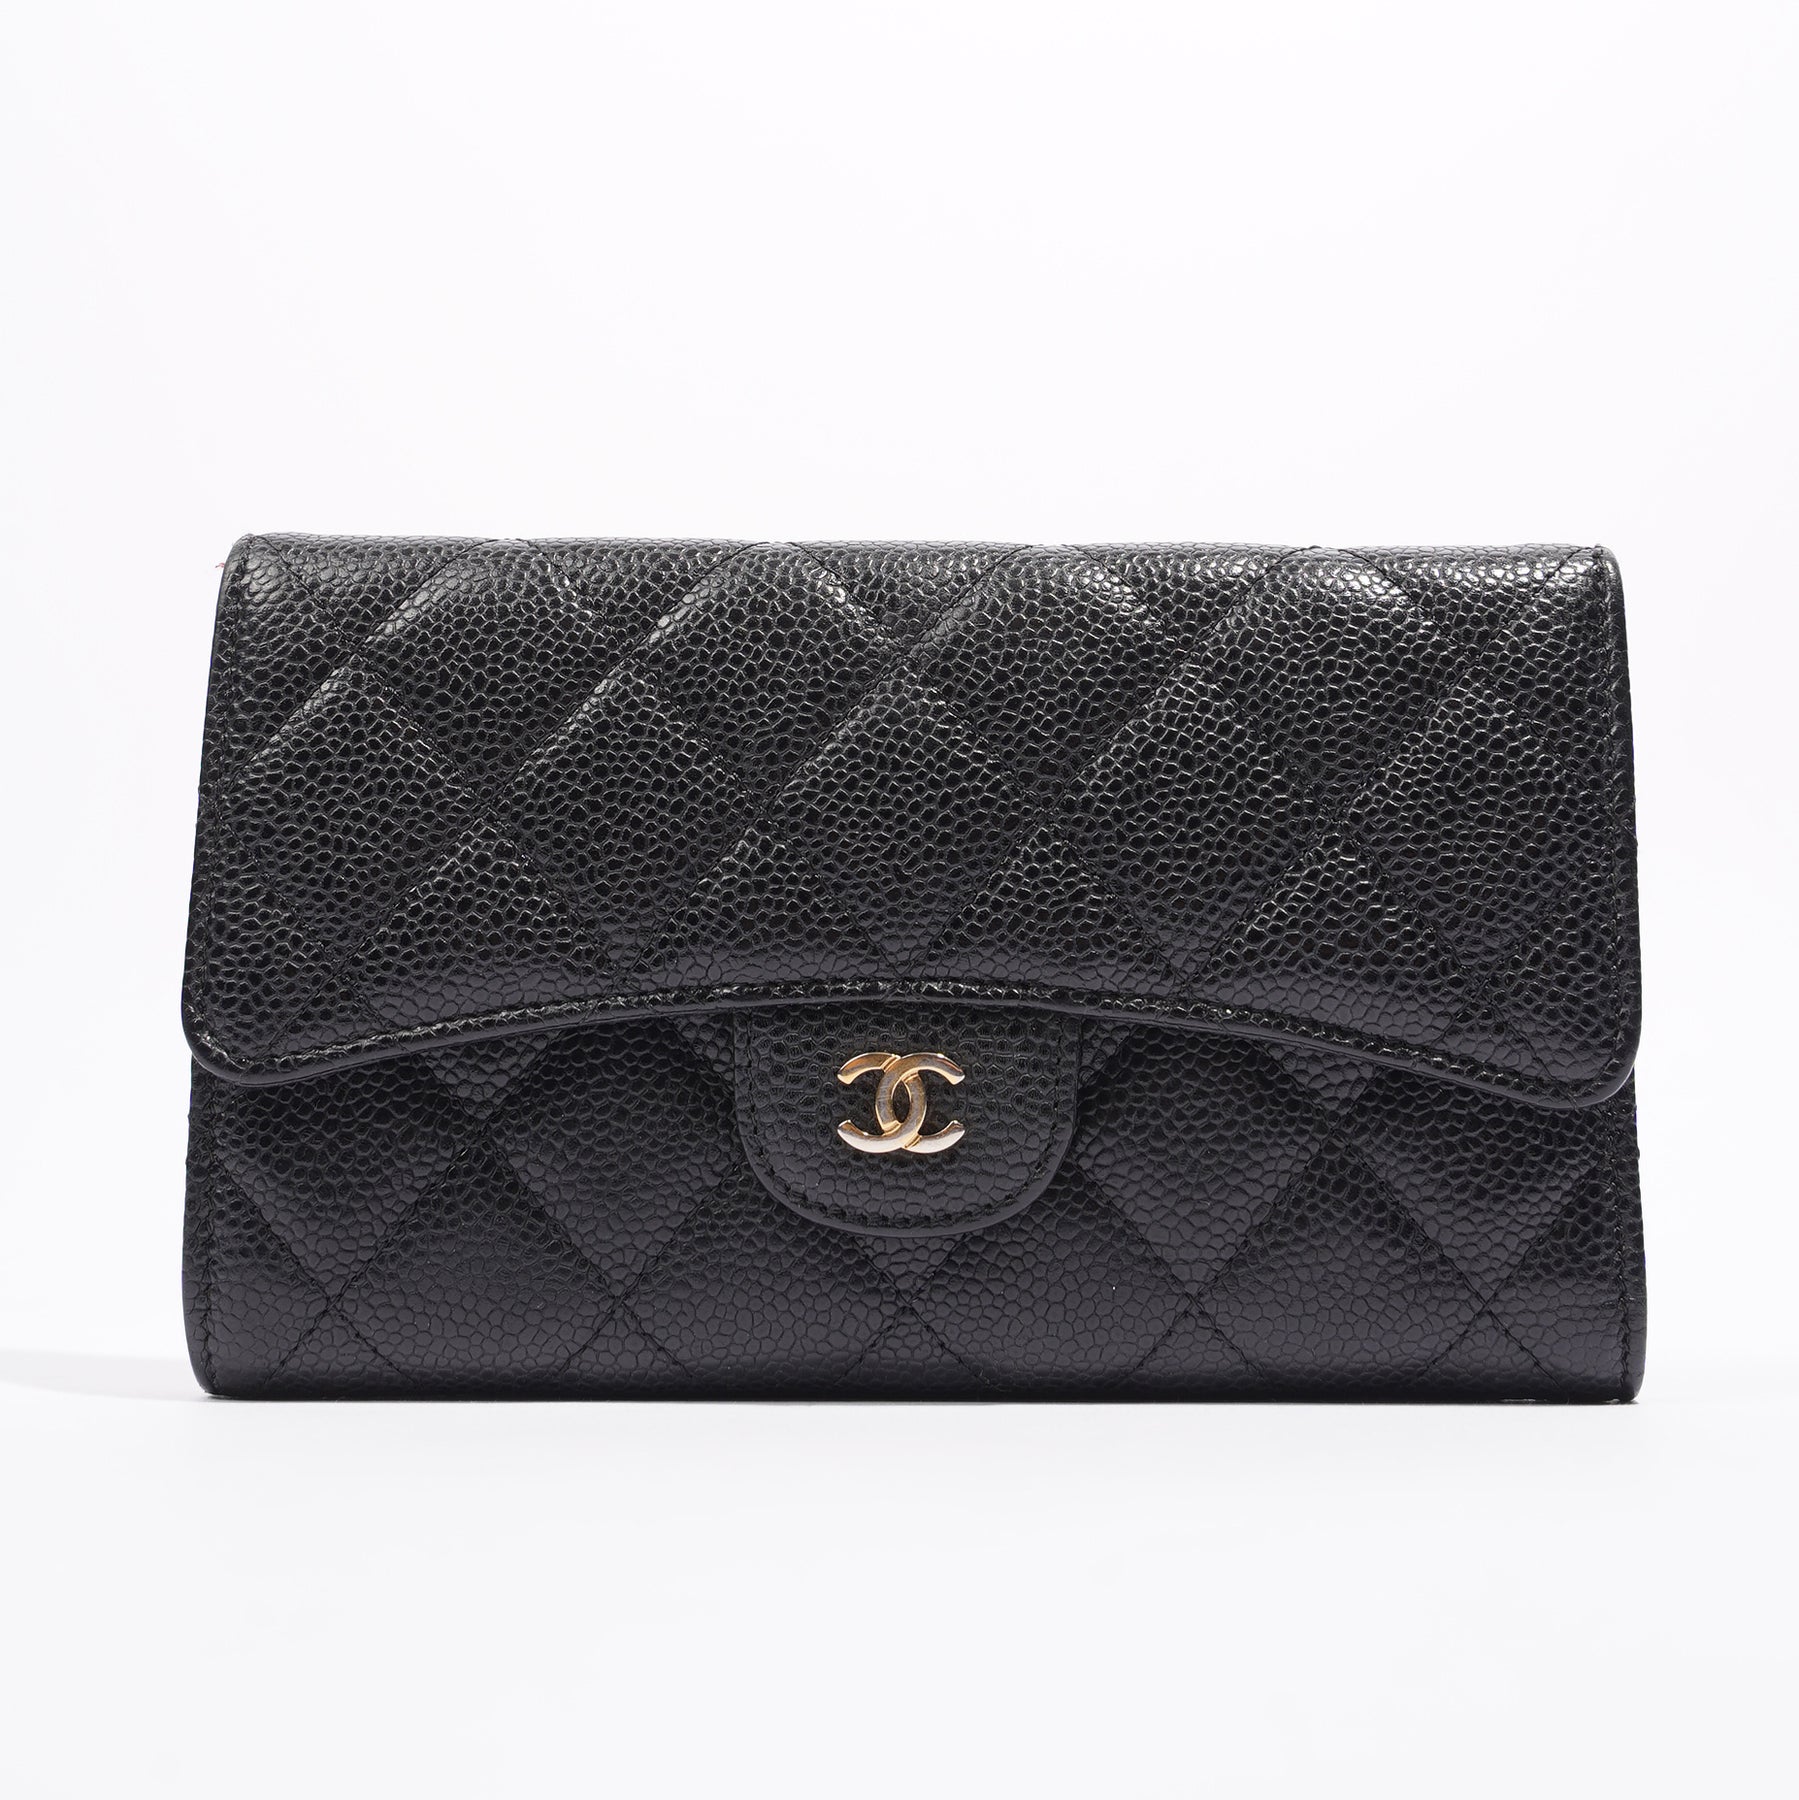 Chanel Classic Medium Flap Wallet In Grained Calfskin With Gold Hardware ( Wallets and Small Leather Goods,Wallets)